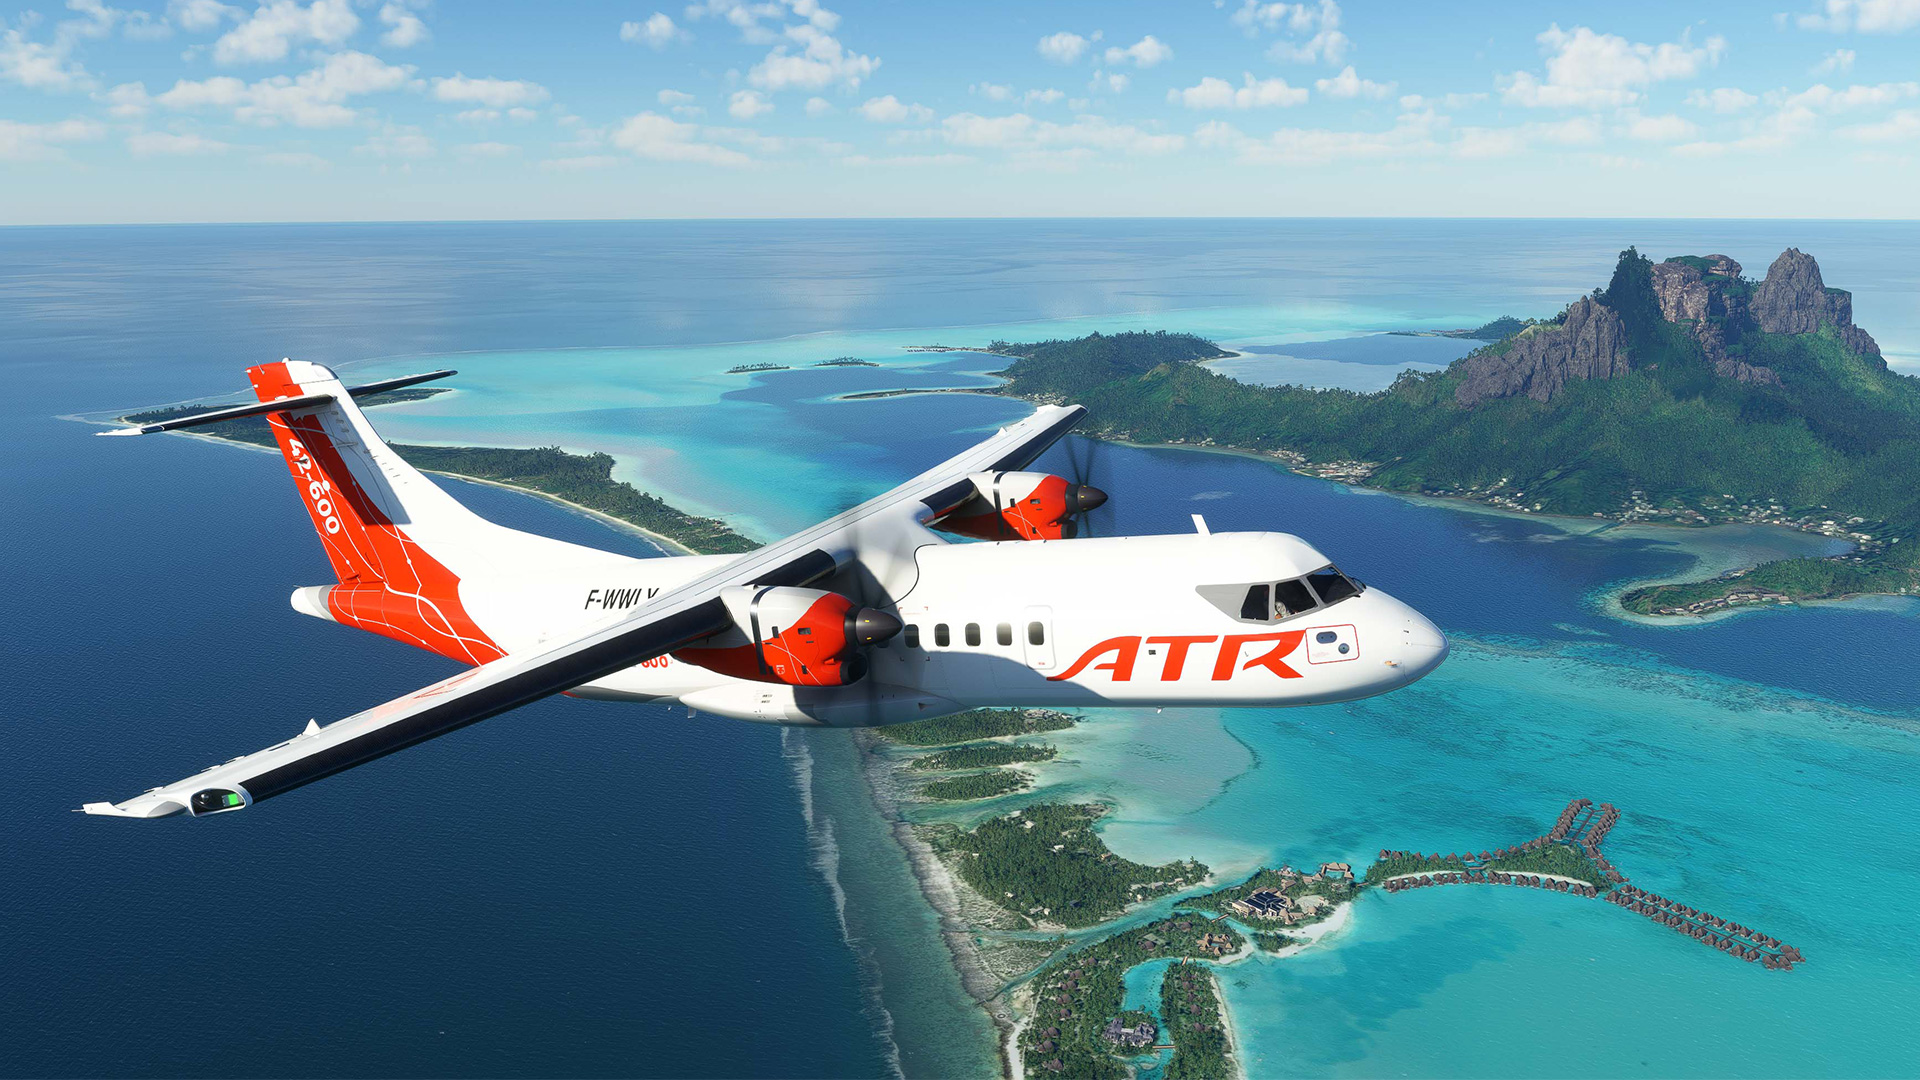 Microsoft Flight Simulator Releases the First Aircraft in the New